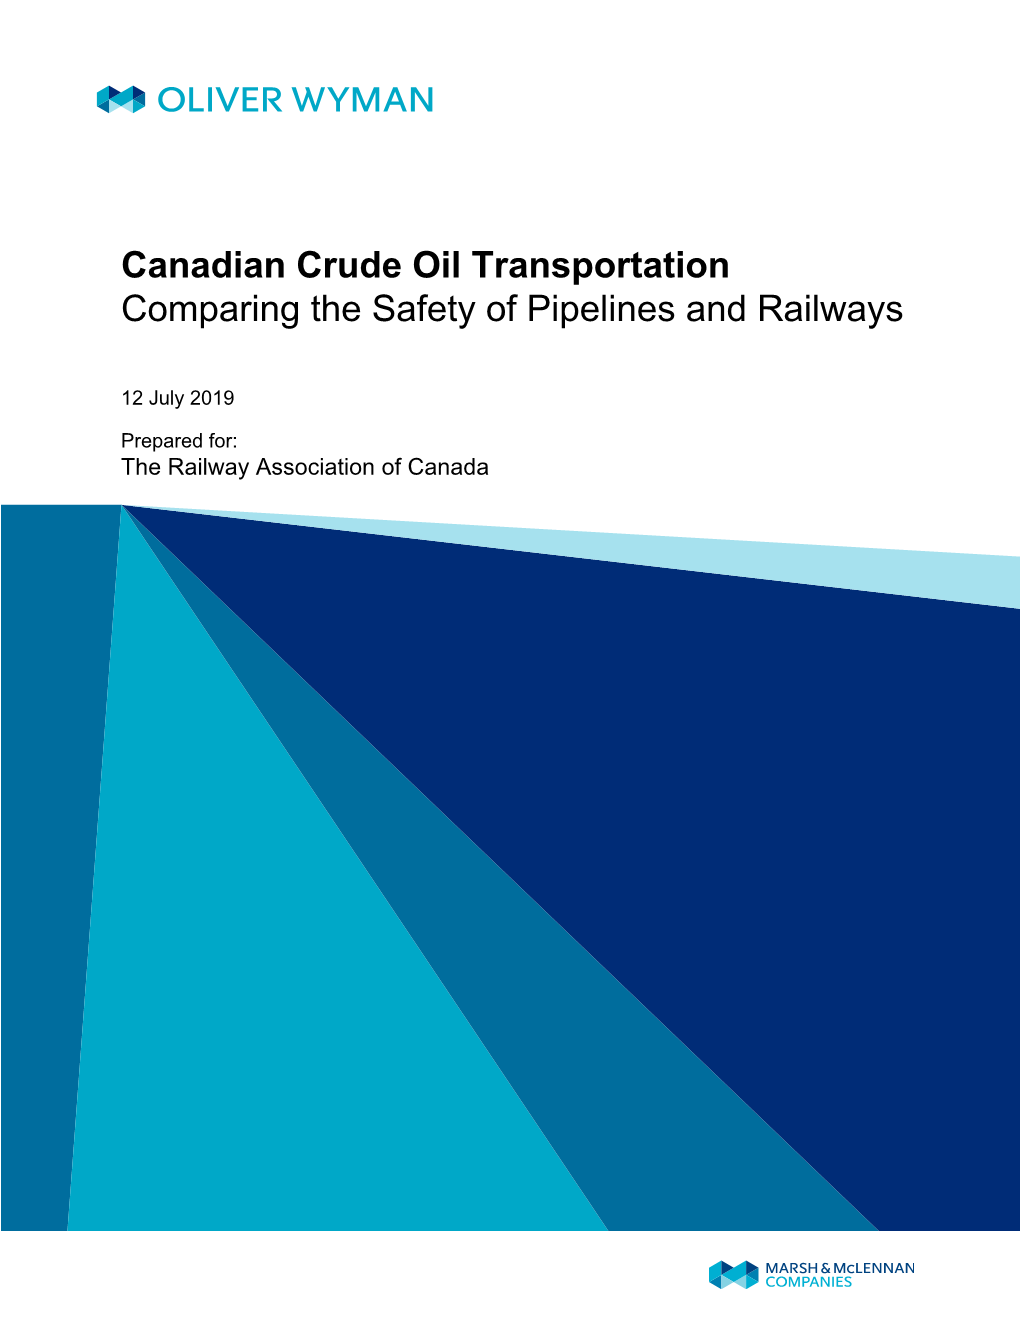 Canadian Crude Oil Transportation Comparing the Safety of Pipelines and Railways